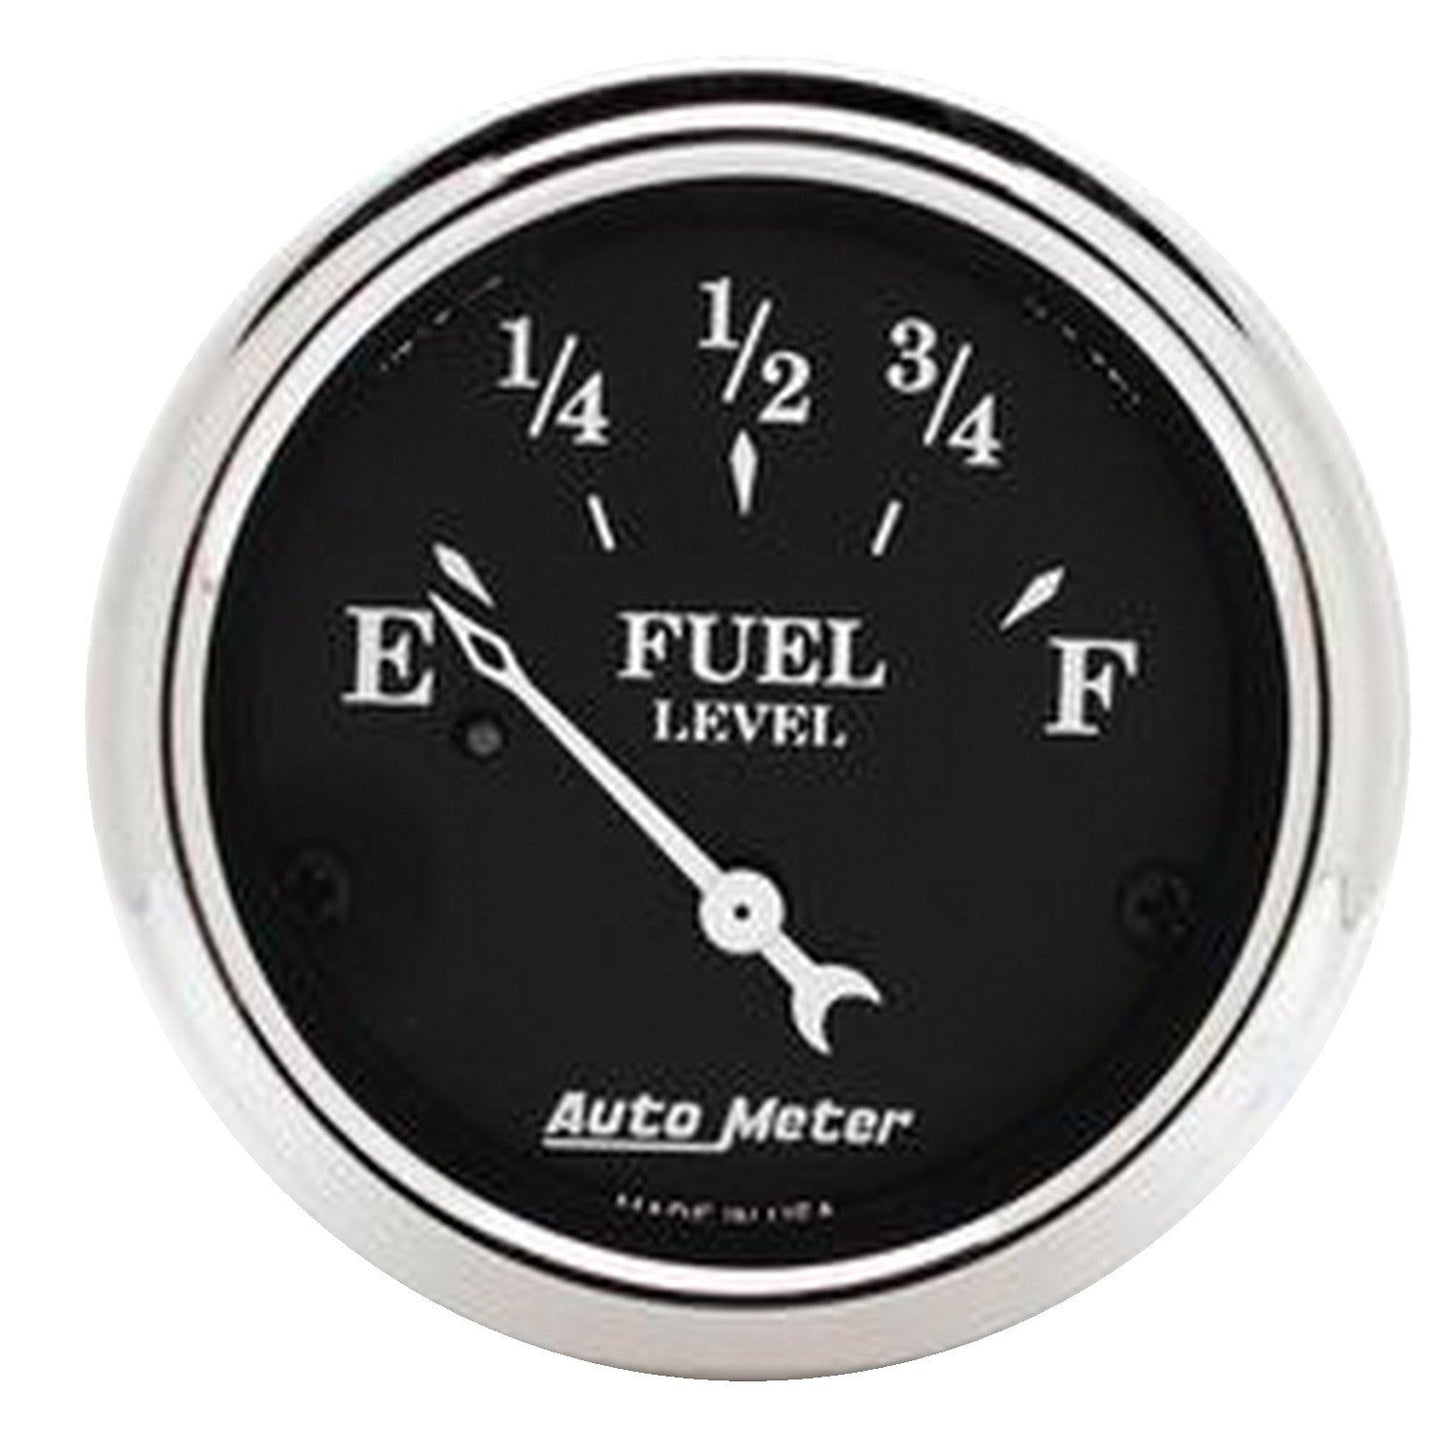 AutoMeter - 2-1/16" FUEL LEVEL, 73-10 Ω, AIR-CORE, OLD TYME BLACK (1716)